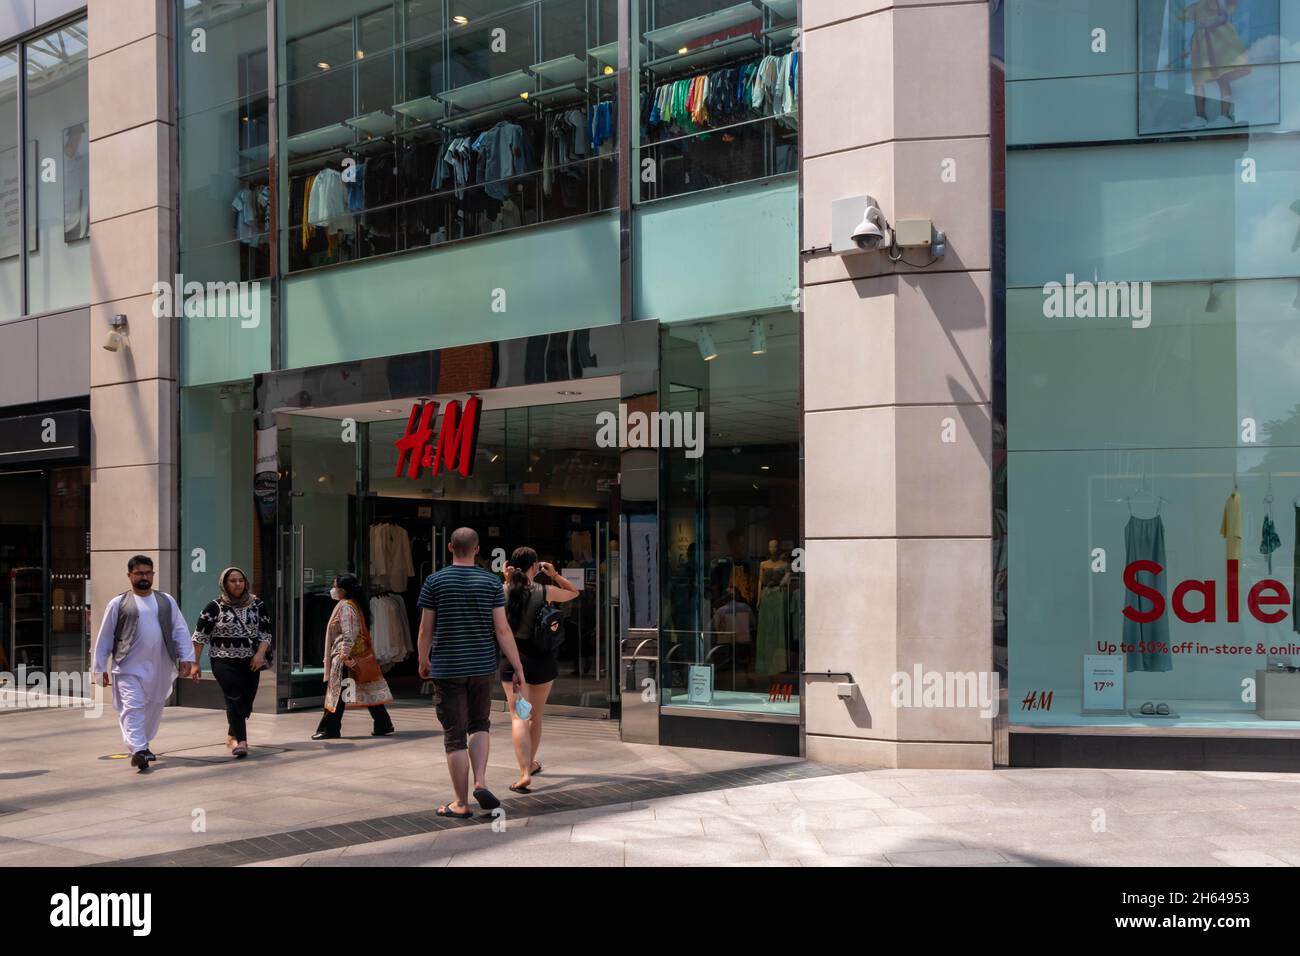 High Wycombe, England - July 21st 2021: People entering and leaving a H& M store.. The chain is owned by a Swedish mutinational Stock Photo